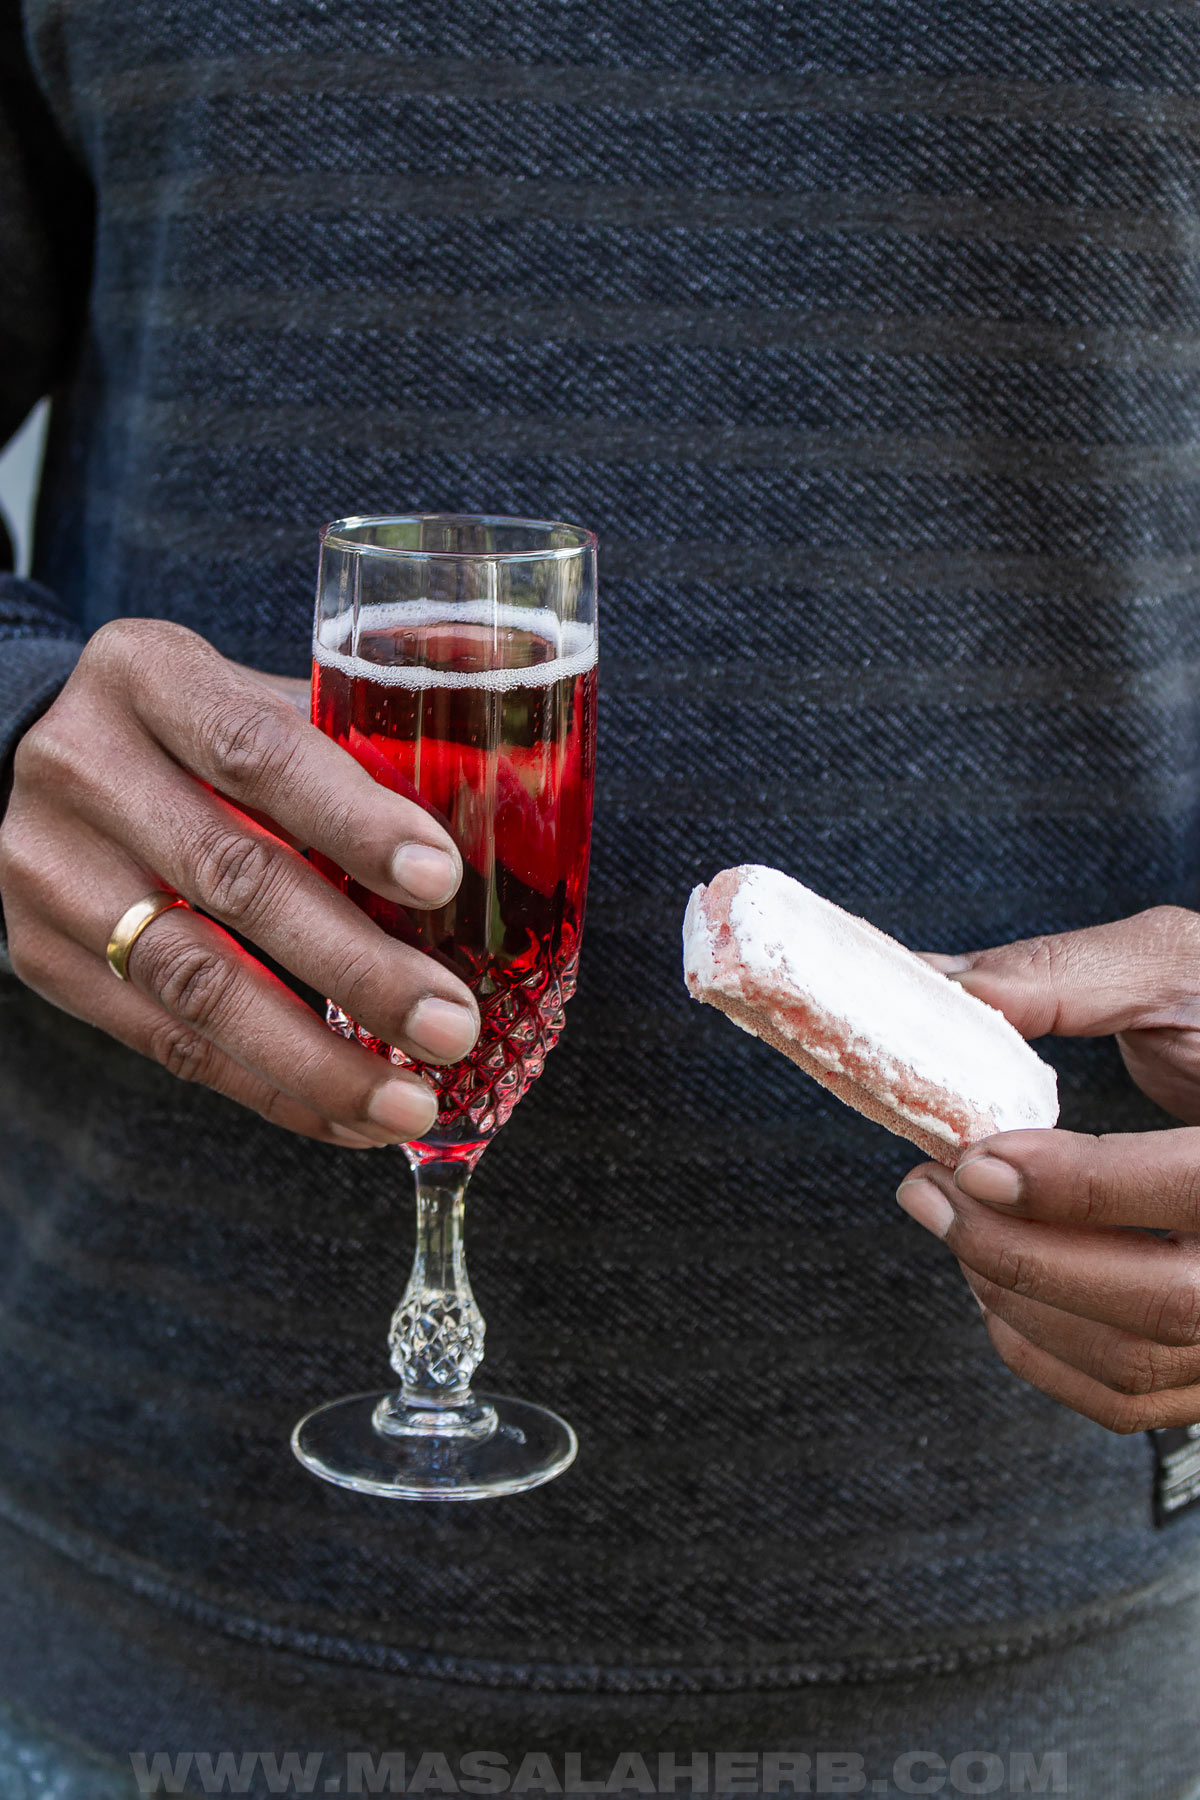 Kir royale with a biscuit rose de Reims